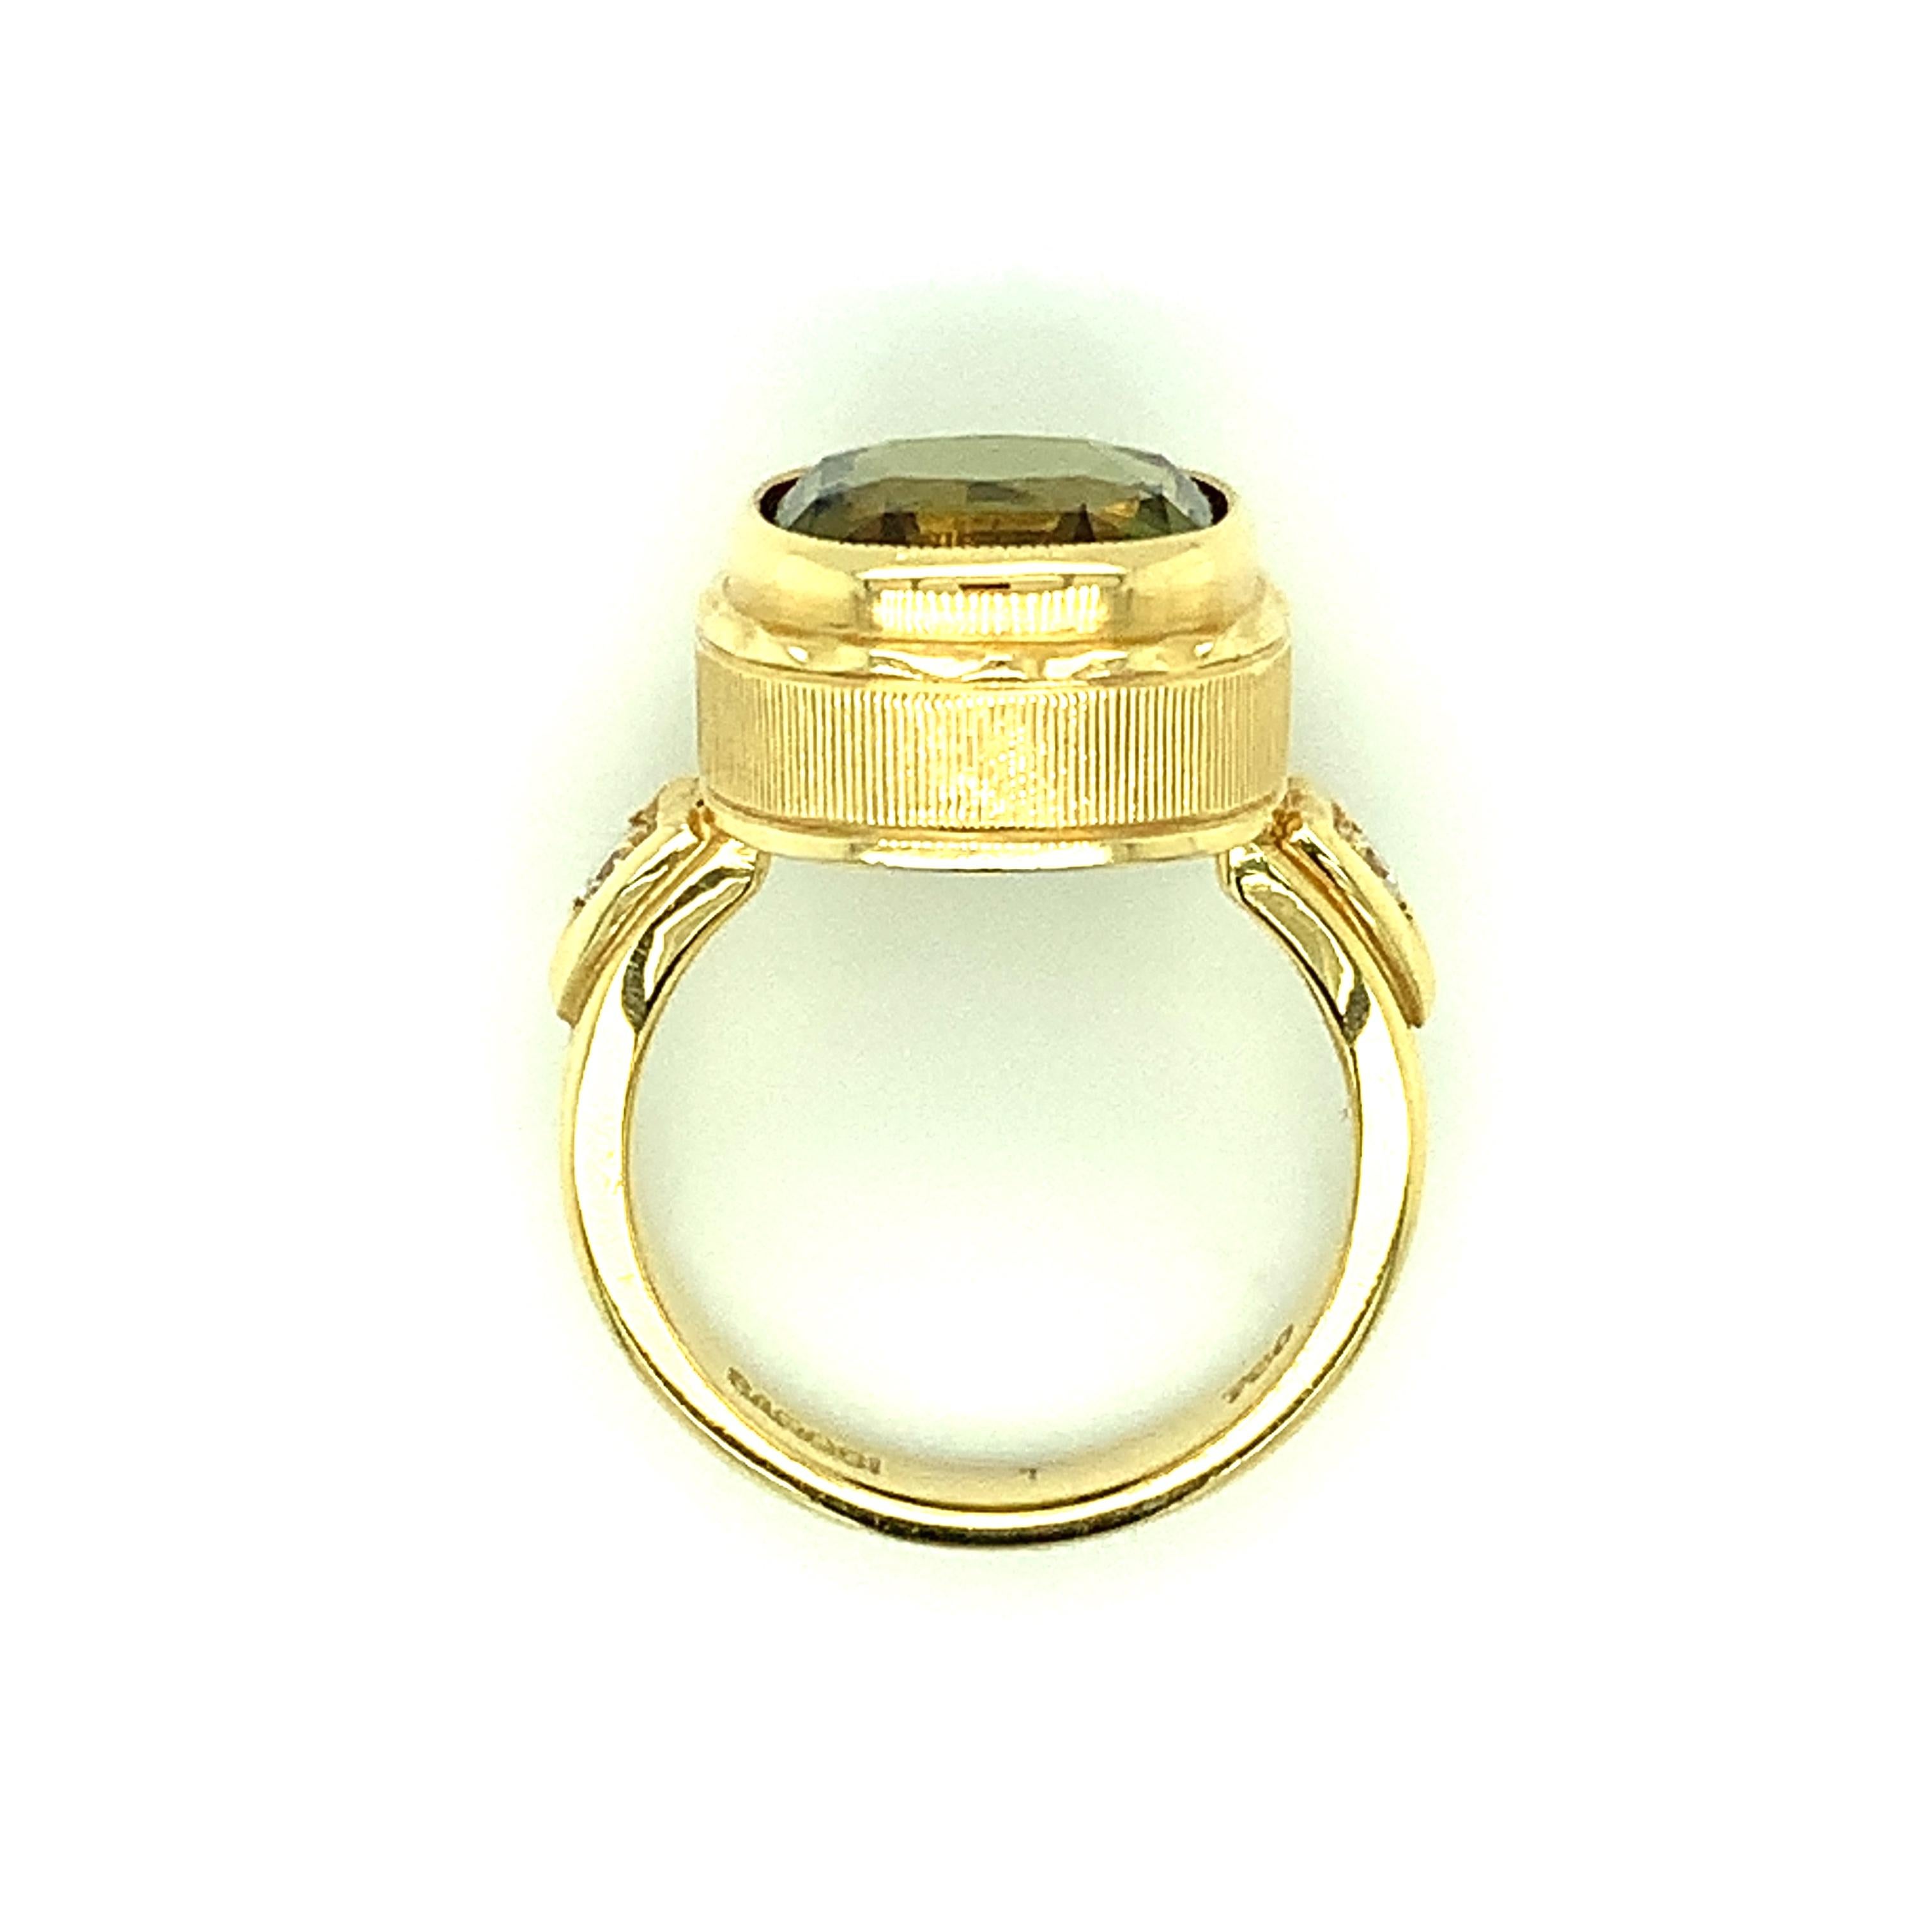 8.16 Carat Chrysoberyl and Diamond Ring, Hand-Engraved 18k Yellow Gold  For Sale 2